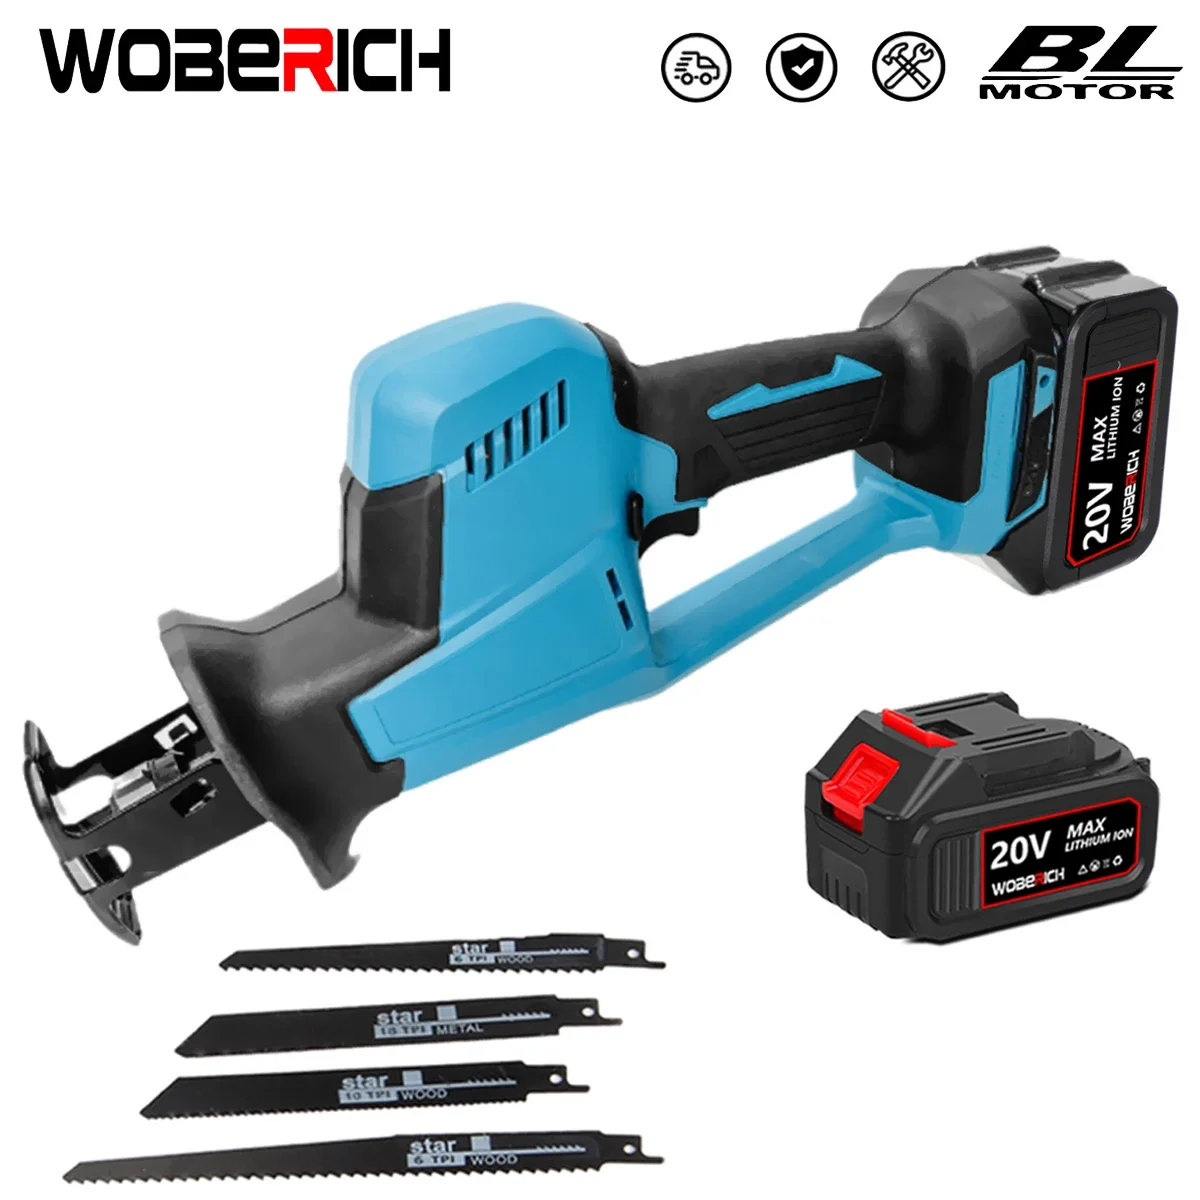 18V Brushless Cordless Reciprocating Saw Rechargeable High PowerMeatl Wood Quick Reciprocating Saw For Makita 18V Battery hss step drill bit set stainless steel coated step quick change drilling power tools for metal wood hole cutter 4 12 4 20 4 32mm